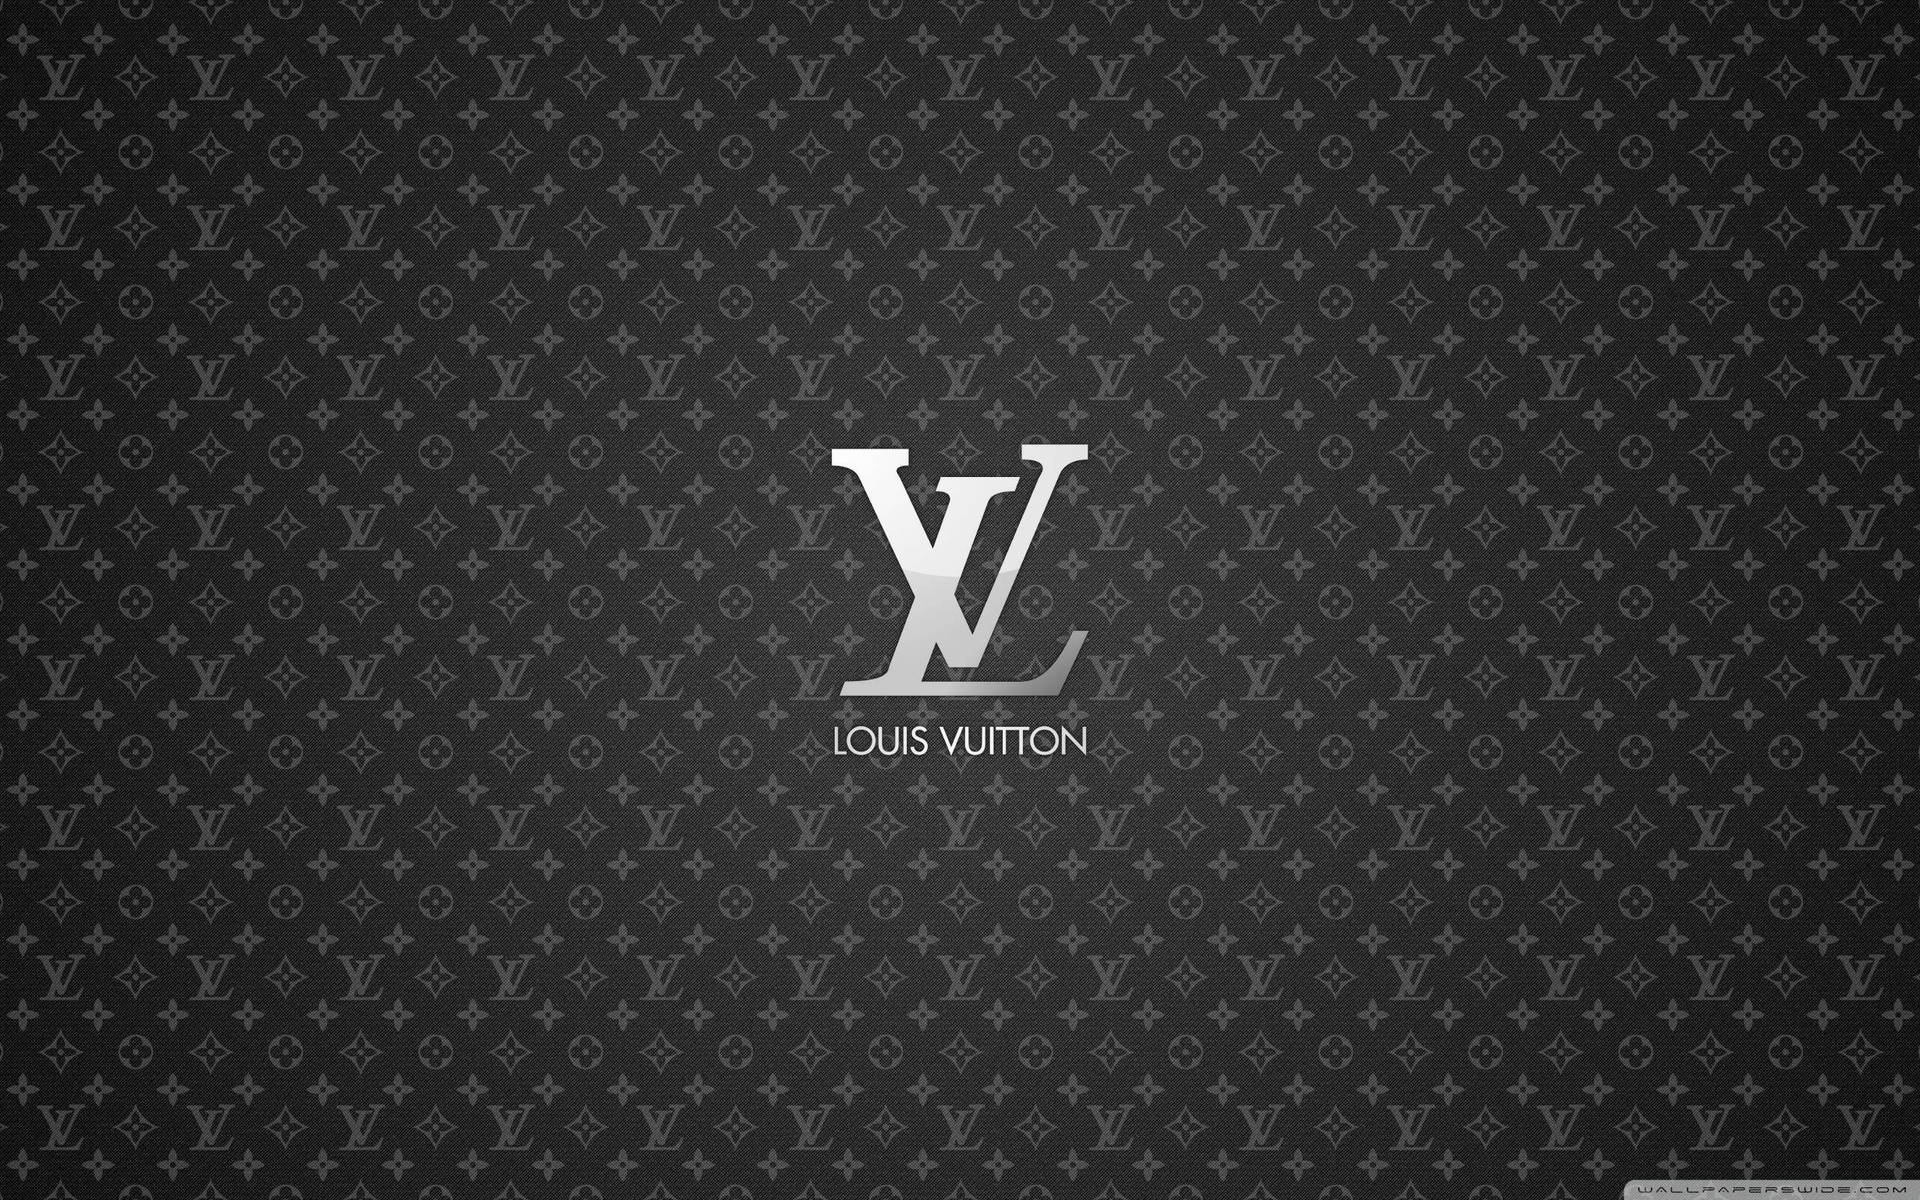 Louis Vuitton 2560X1600 Wallpaper and Background Image